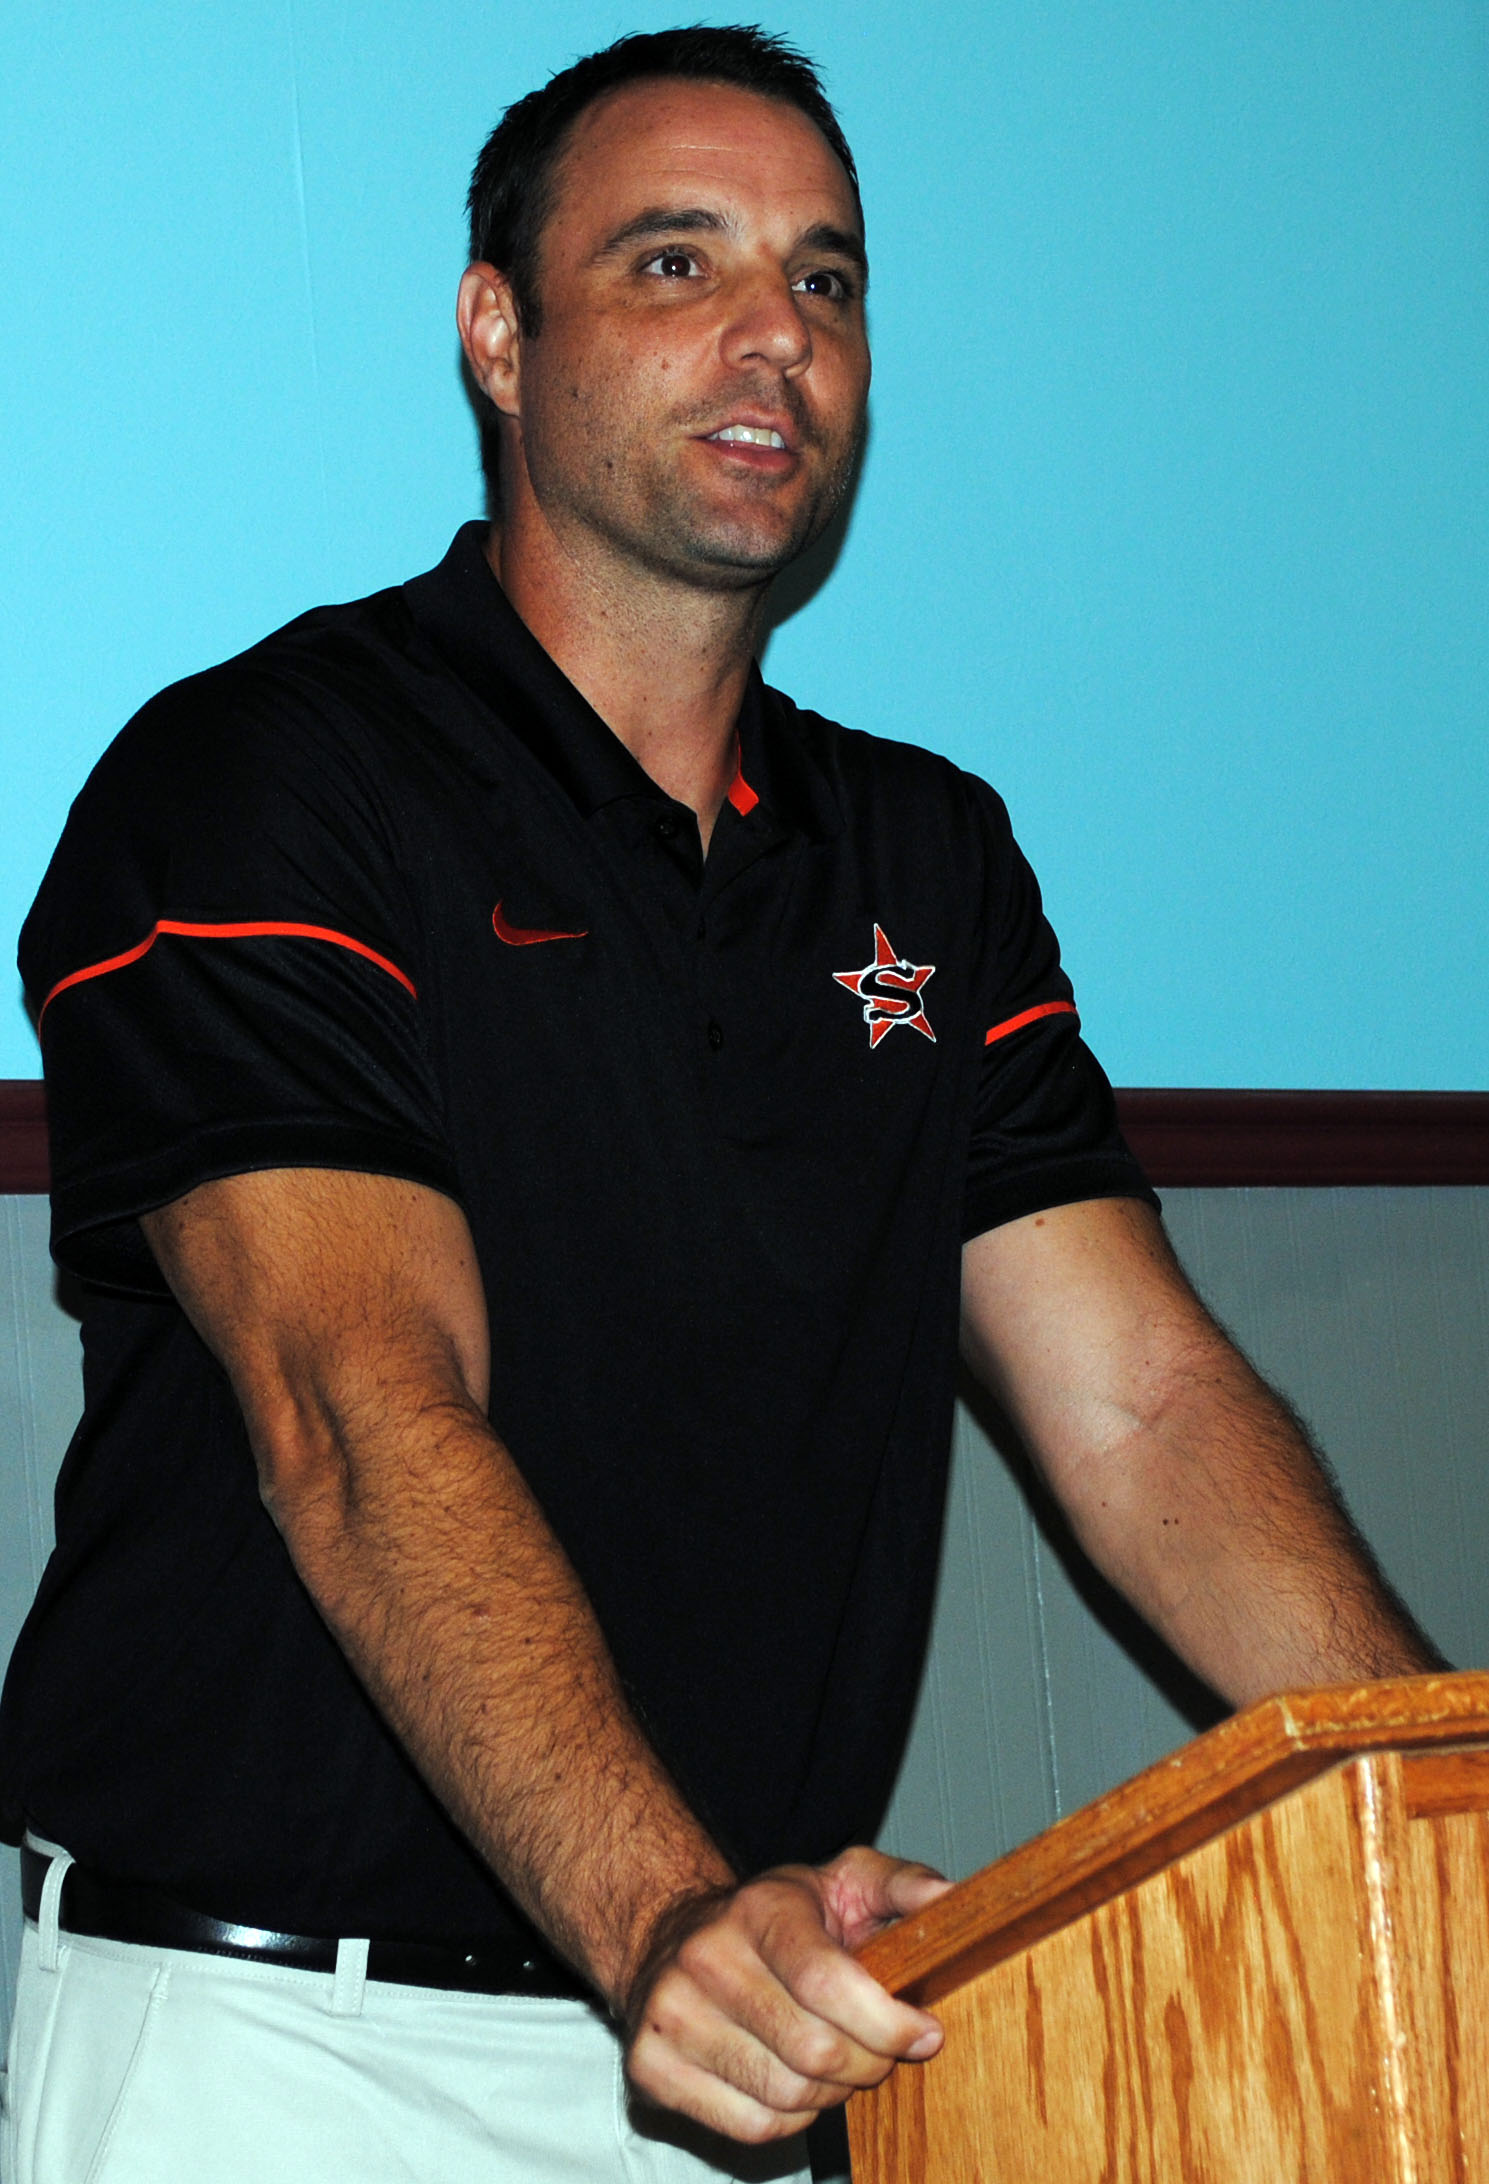 Coach Mike Volarvich speaks to the Nashville Rotary Club Aug. 24.